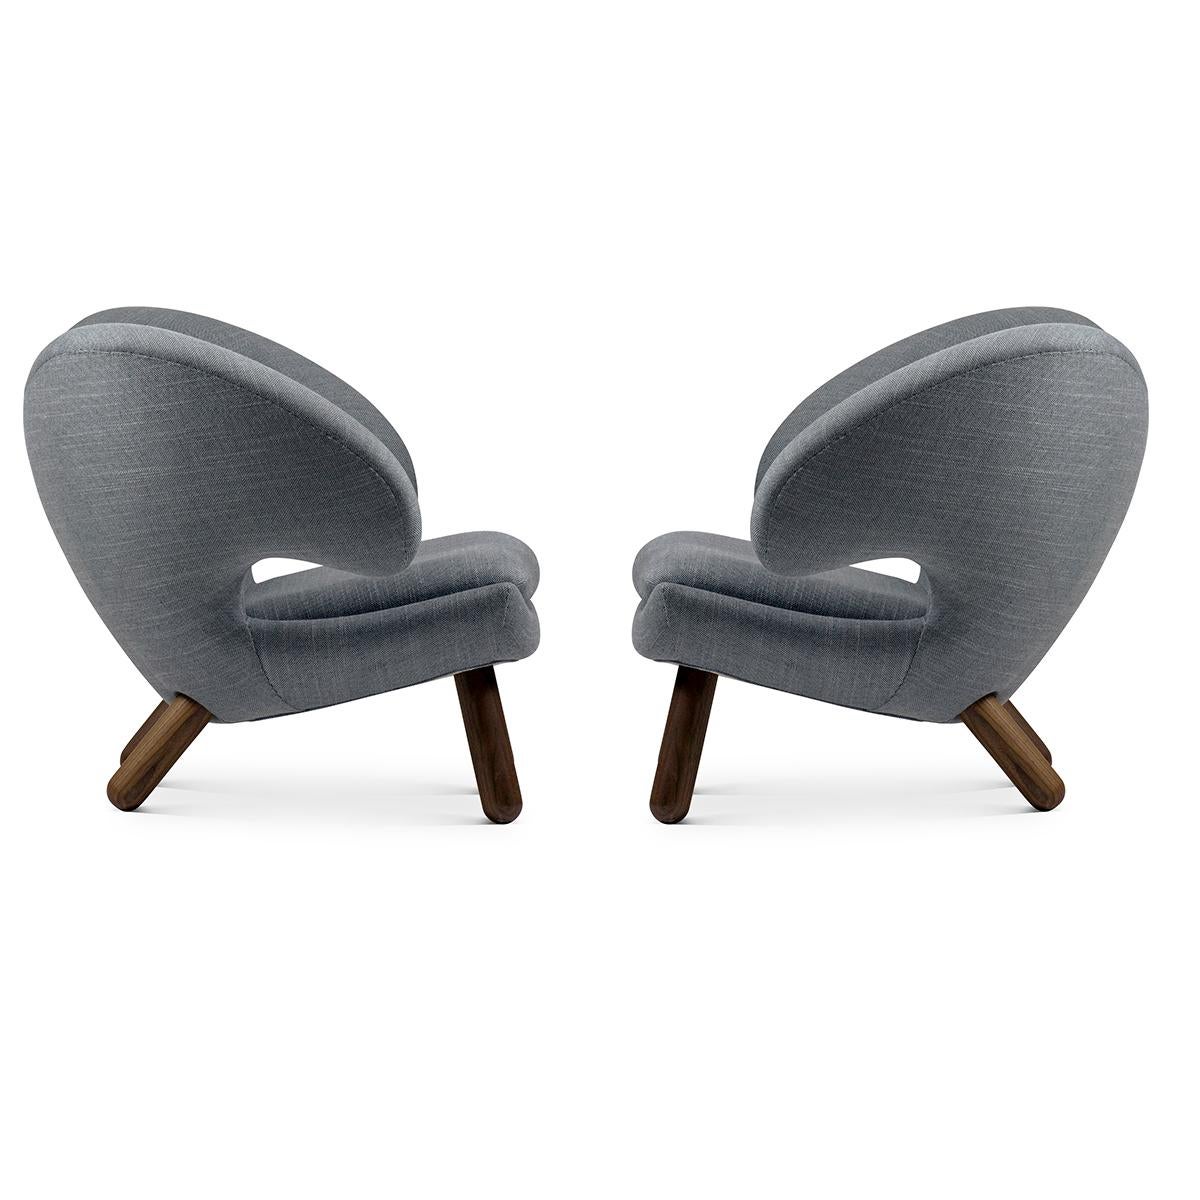 Modern Set of Two Pelican Chairs by Finn Juhl in Fabric and Wood